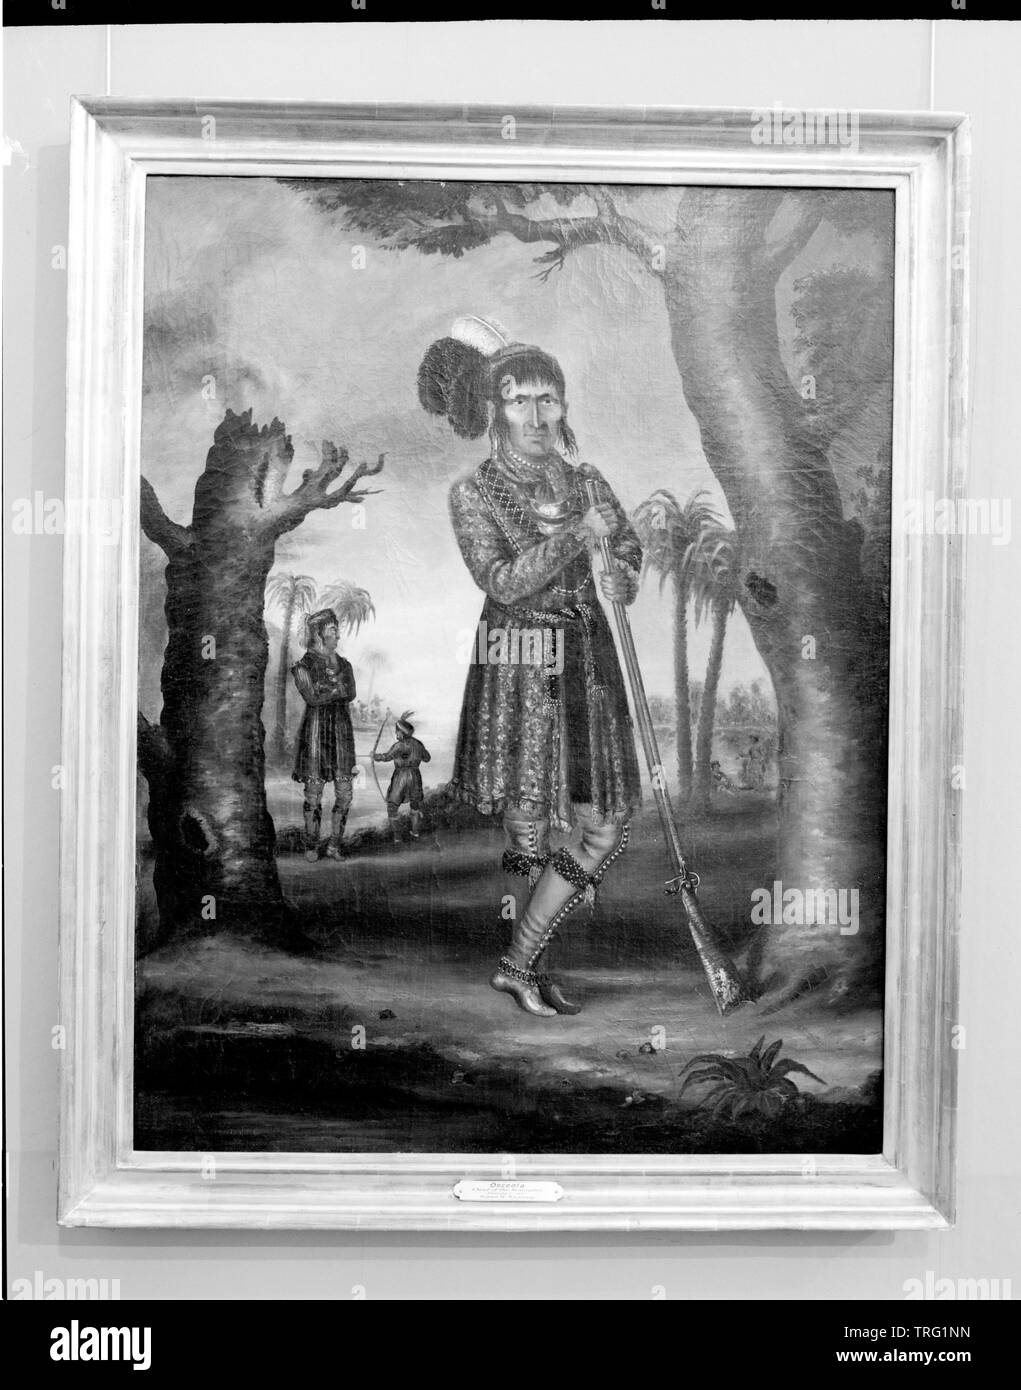 W. M. Laning ca. 1835, "Osceola (Billy Powell), der Häuptling der Semiole-Indianer in Florida. Öl Malerei, Additional-Rights - Clearance-Info - Not-Available Stockfoto